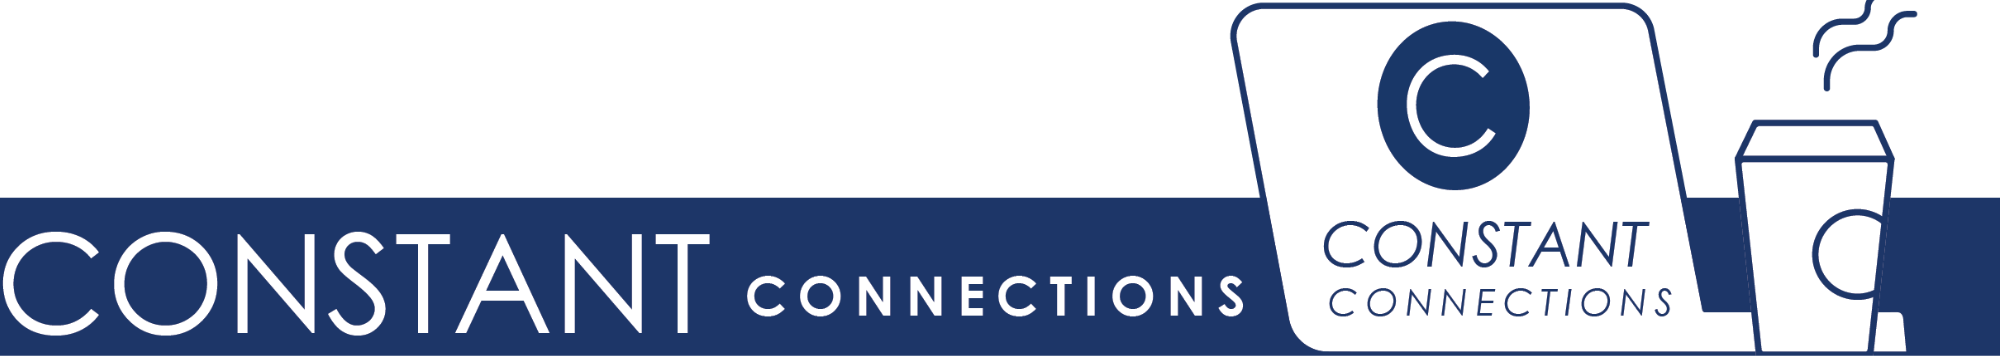 CONSTANT Connections banner header. Navy blue banner saying "CONSTANT Connections" with laptop and coffee cup.